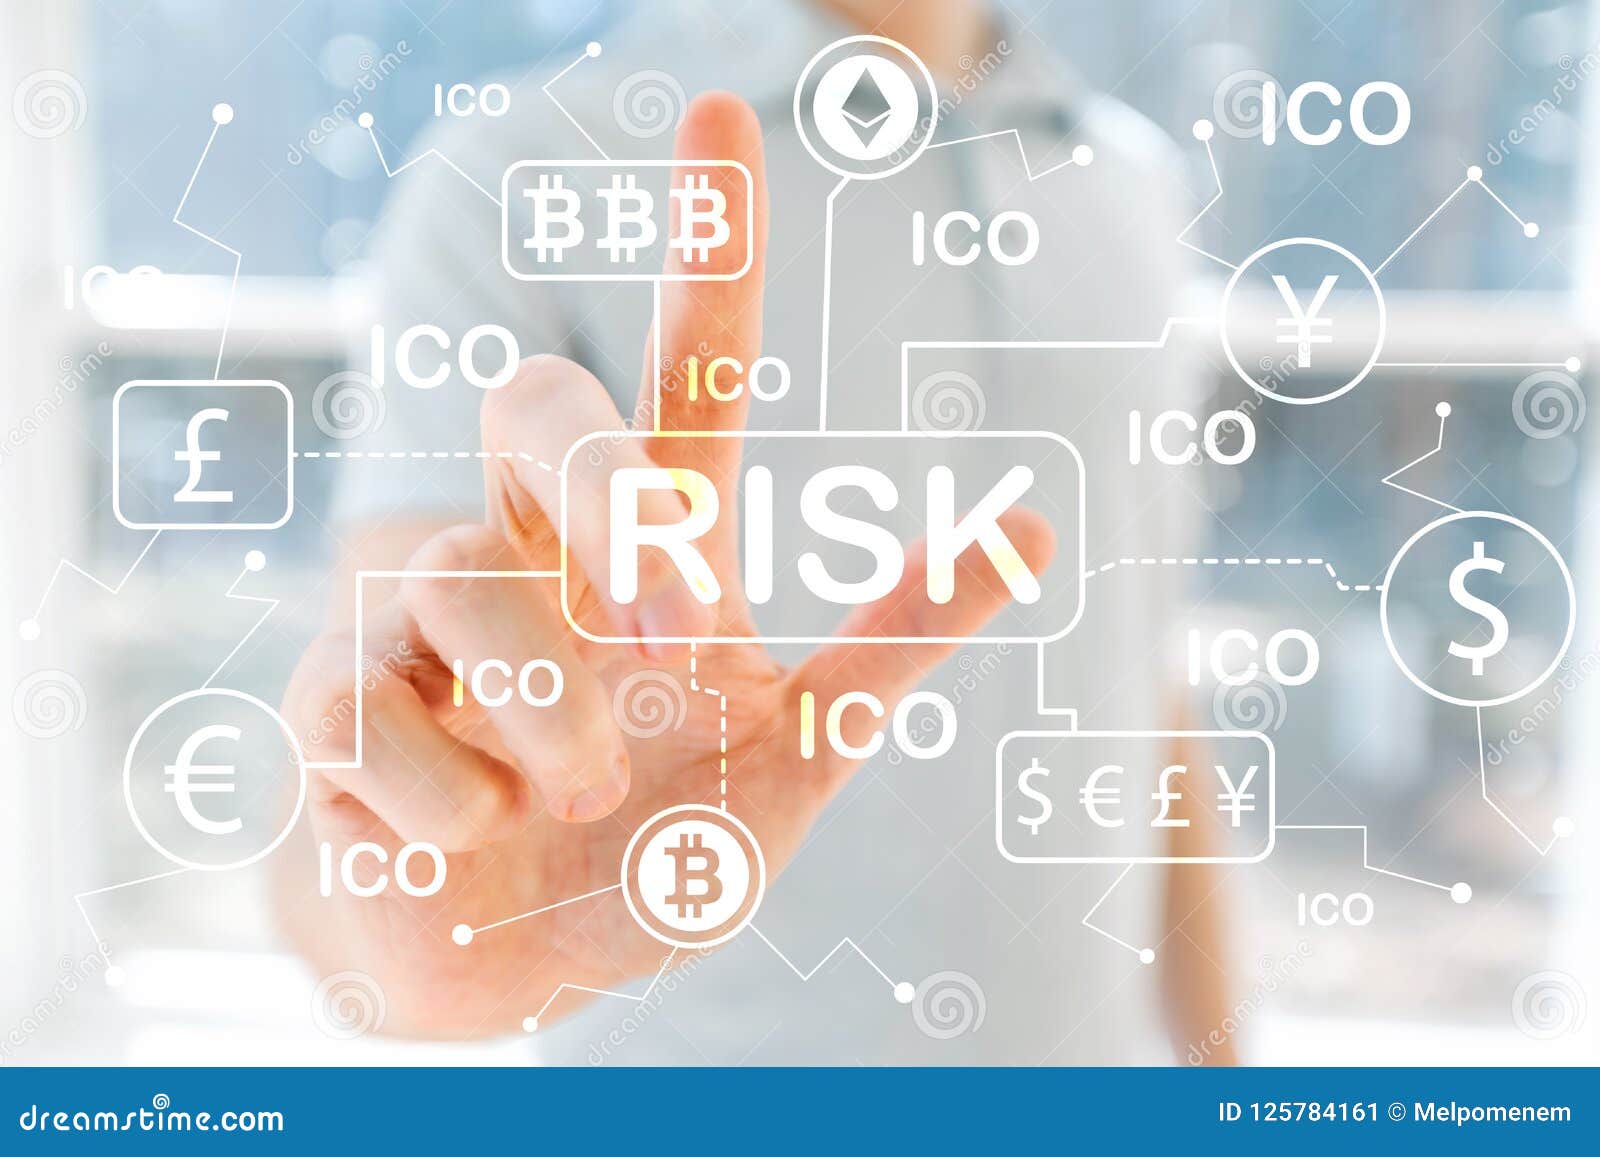 Cryptocurrency ICO Risk Theme With Young Man Stock Image ...